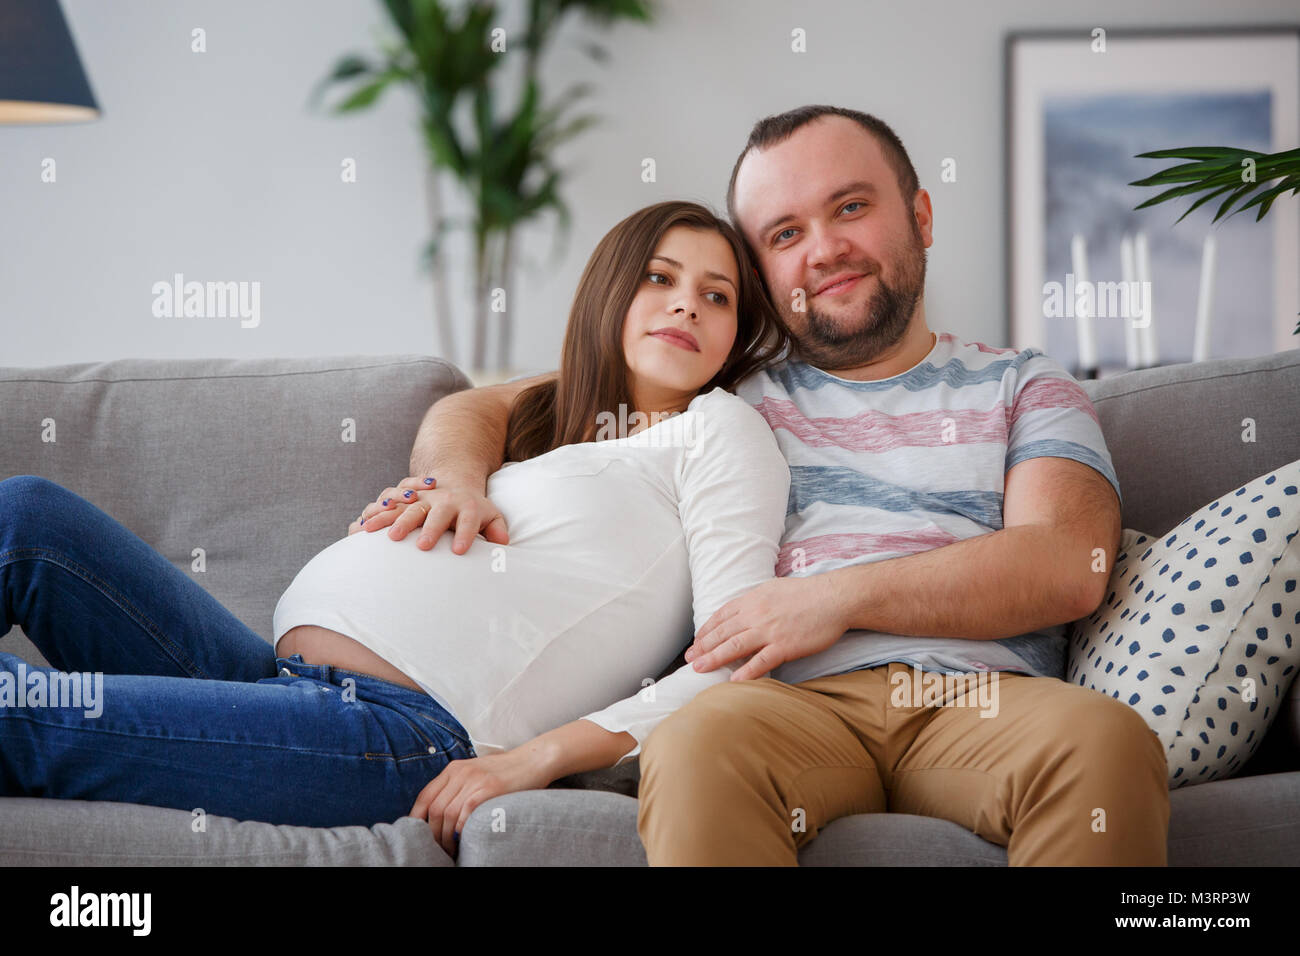 Picture of happy future parents sitting on gray sofa Stock Photo